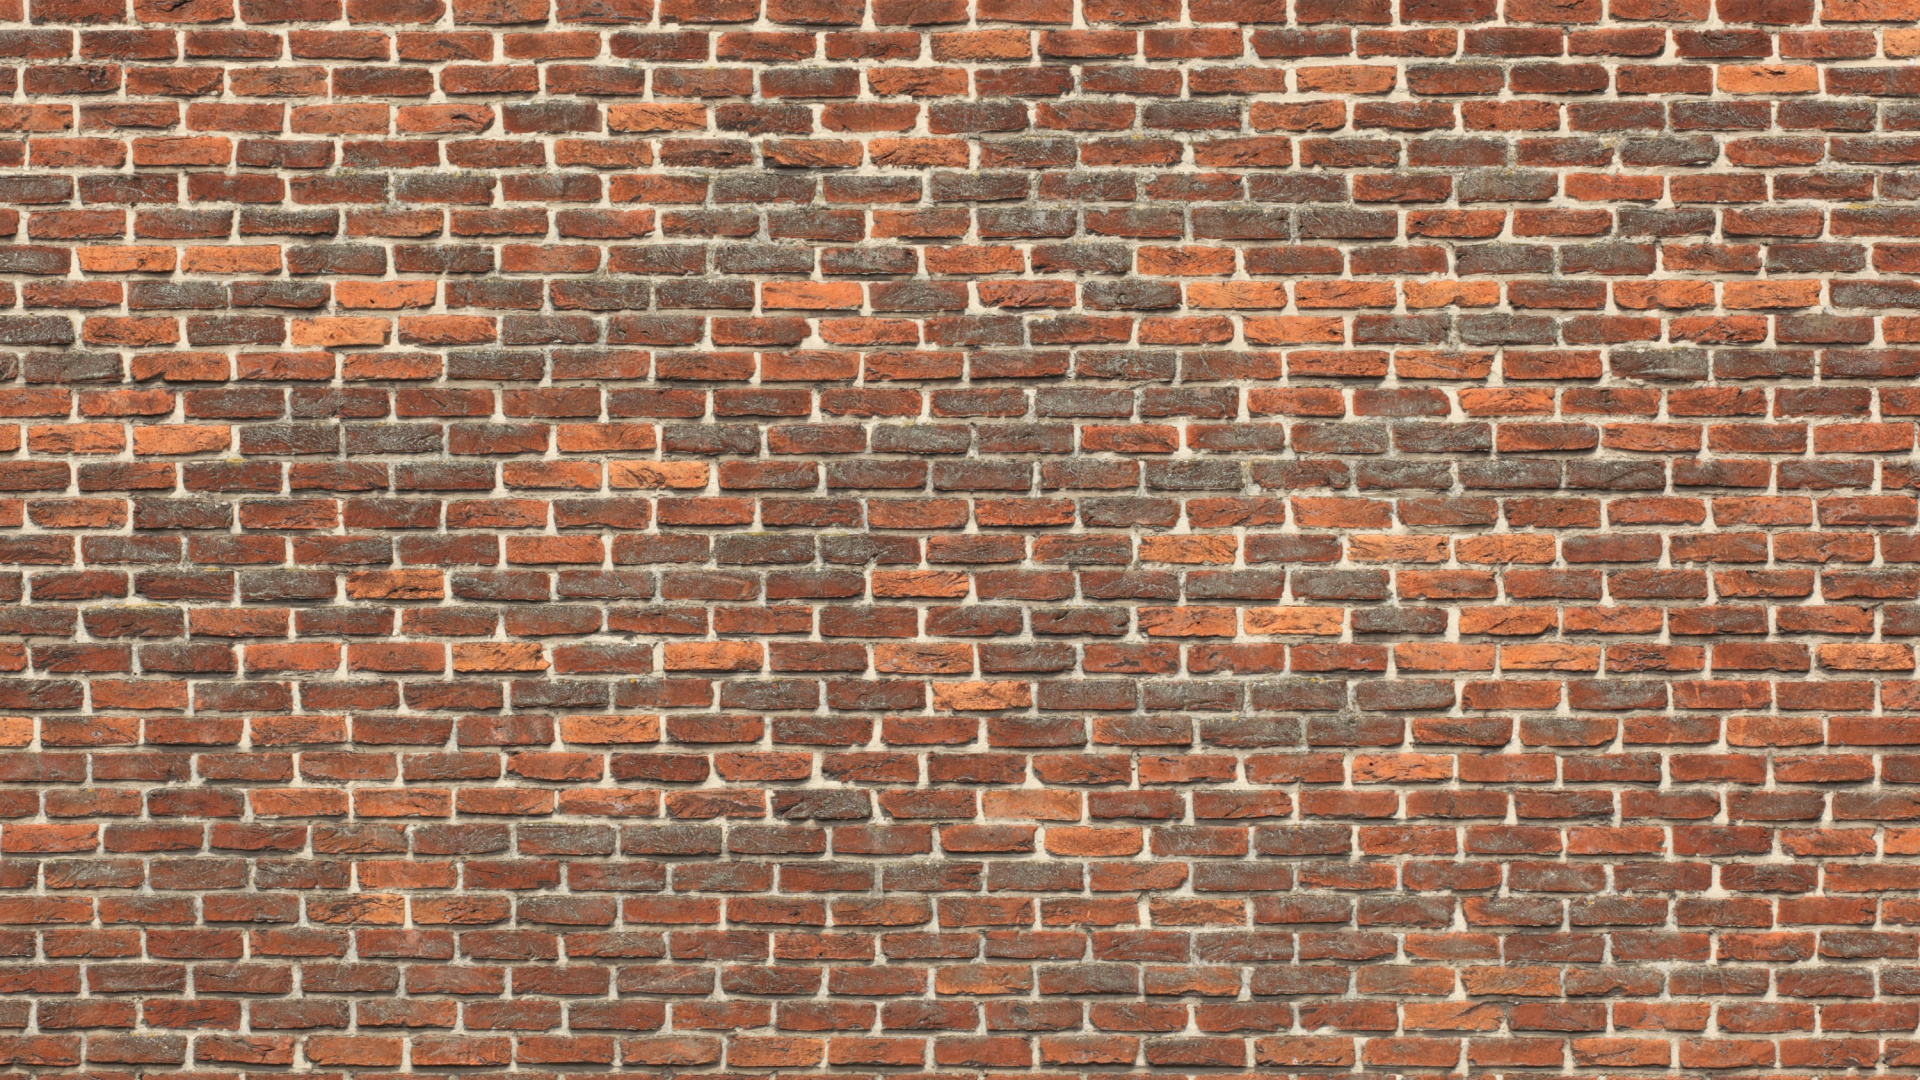 Brown and Black Brick Wall. Wallpaper in 1920x1080 Resolution